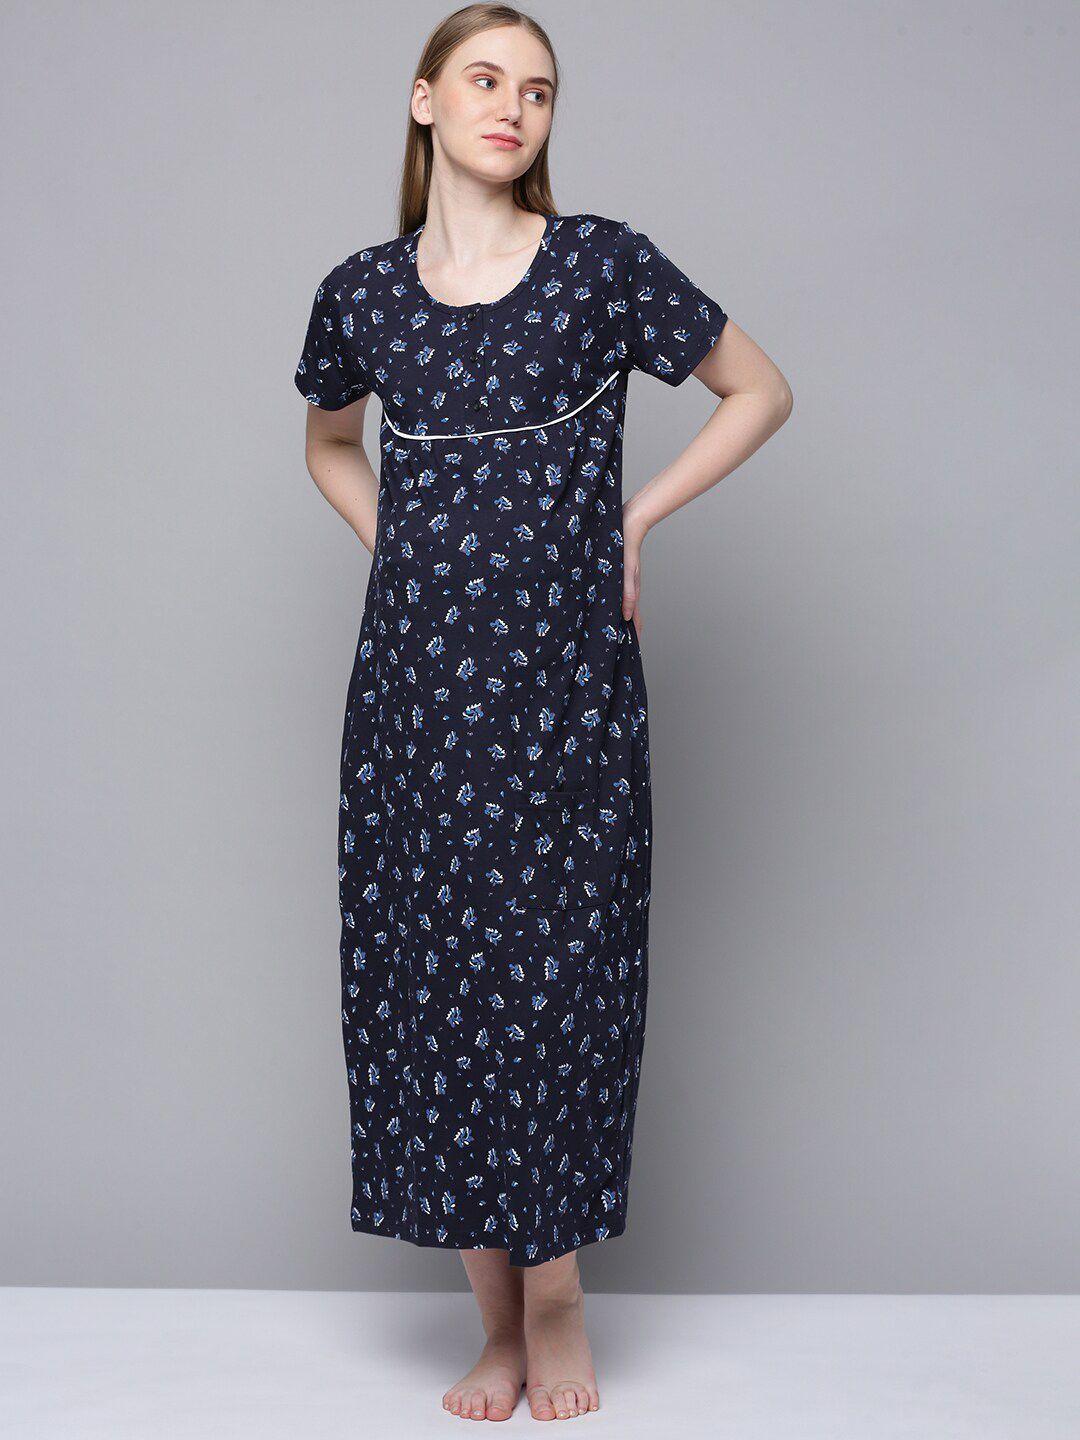 kryptic-floral-printed-pure-cotton-maternity-maxi-nightdress